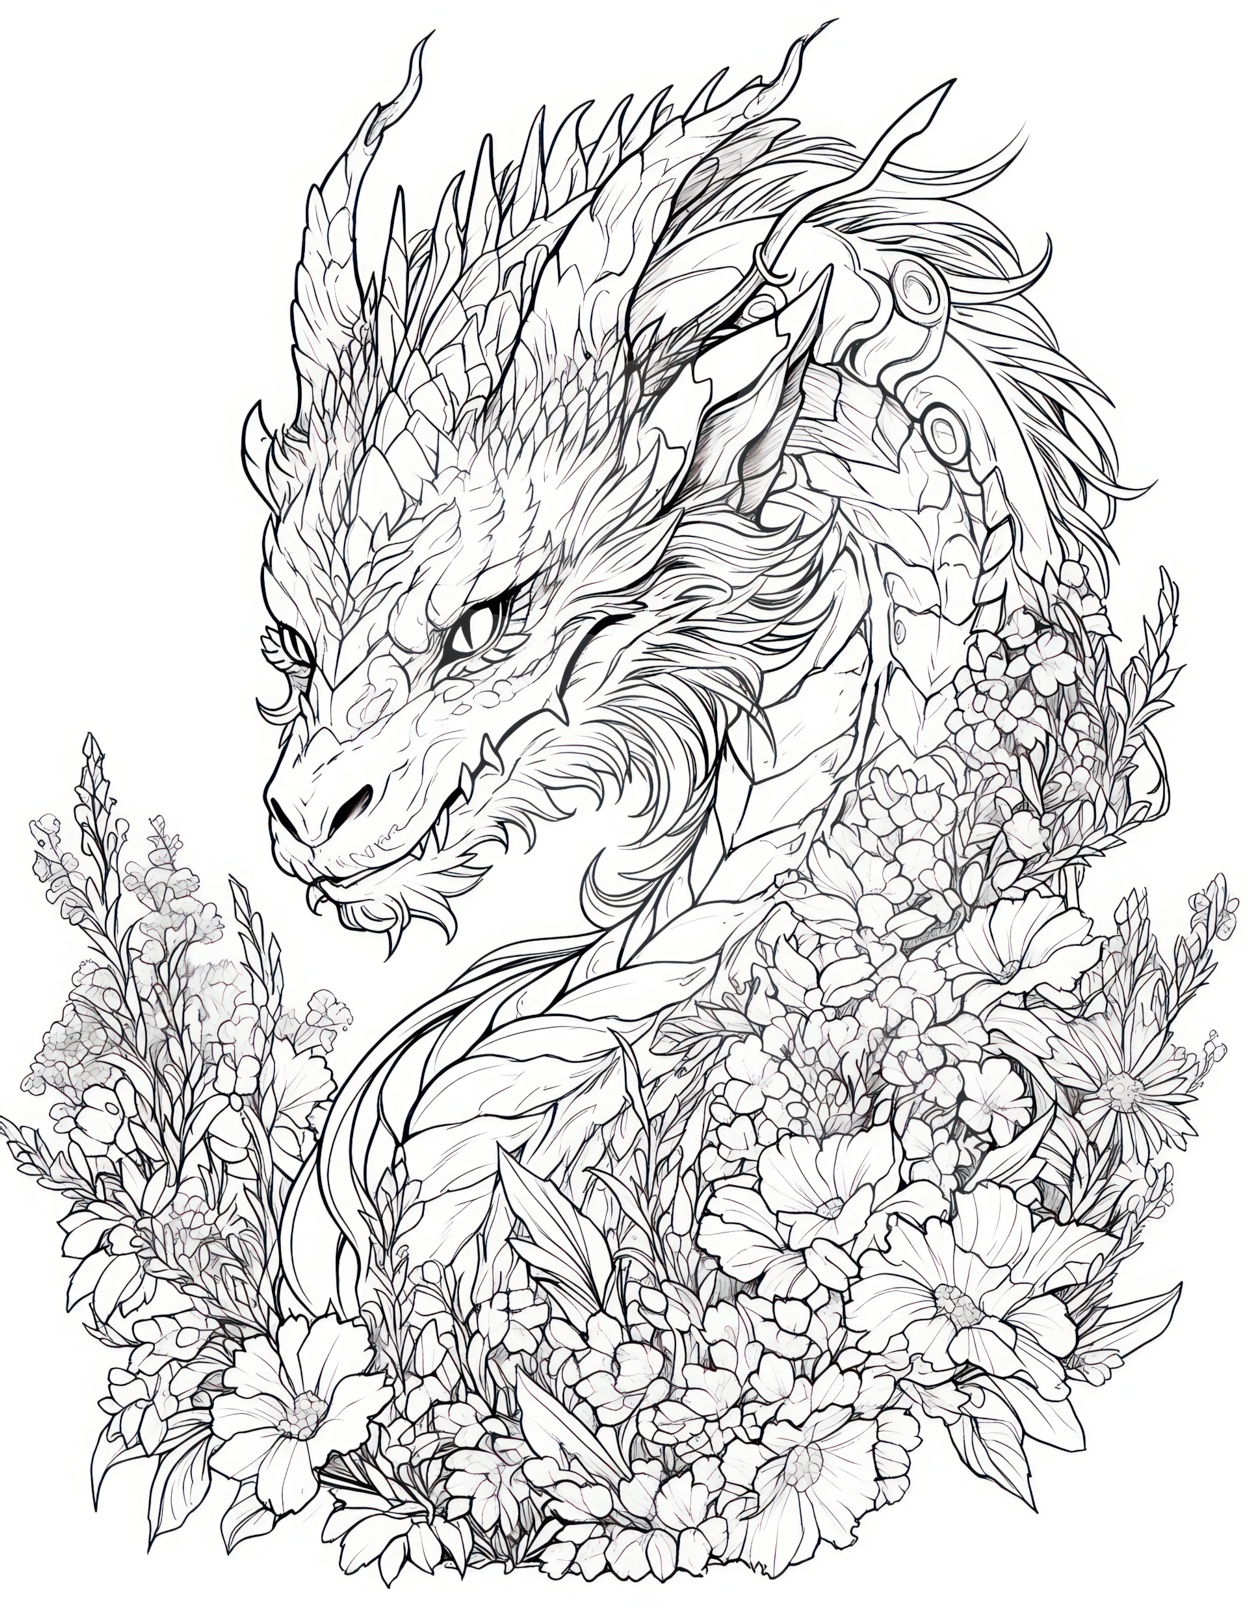 Majestic dragon coloring pages for kids and adults